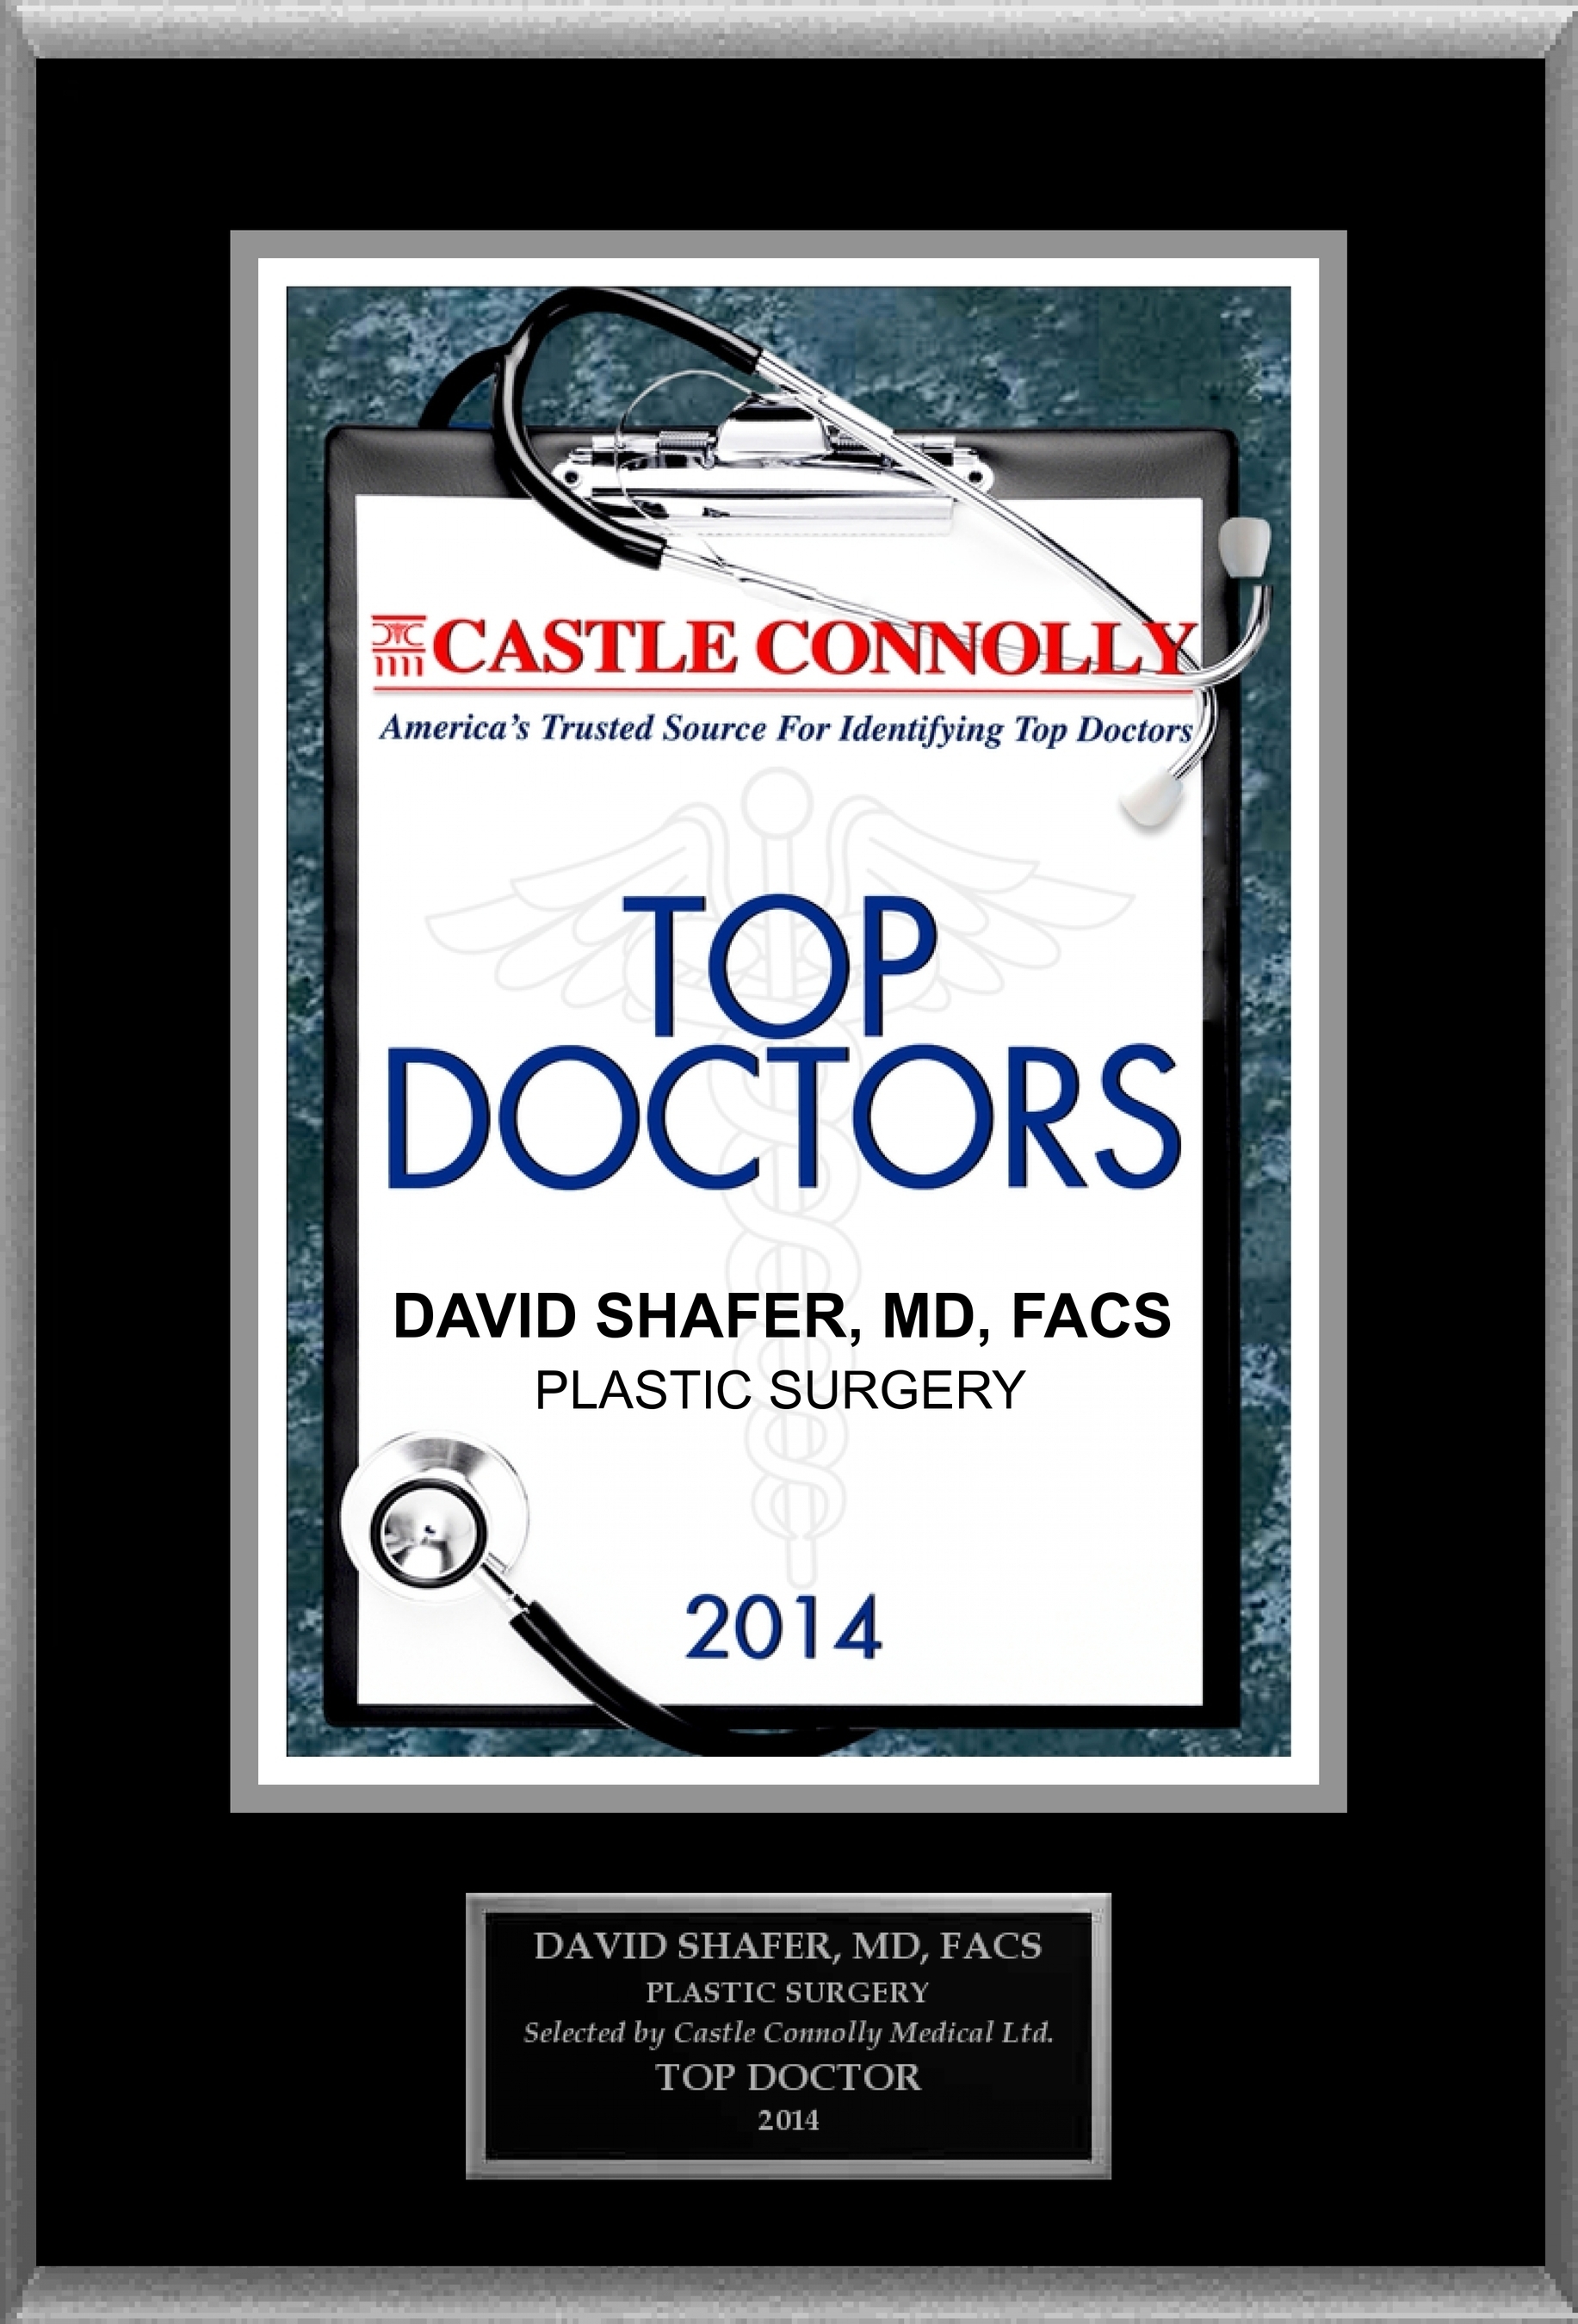 Dr. David Shafer is recognized among Castle Connolly's Top Doctors (R) for New York, NY region in 2014.
 (PRNewsFoto/American Registry)